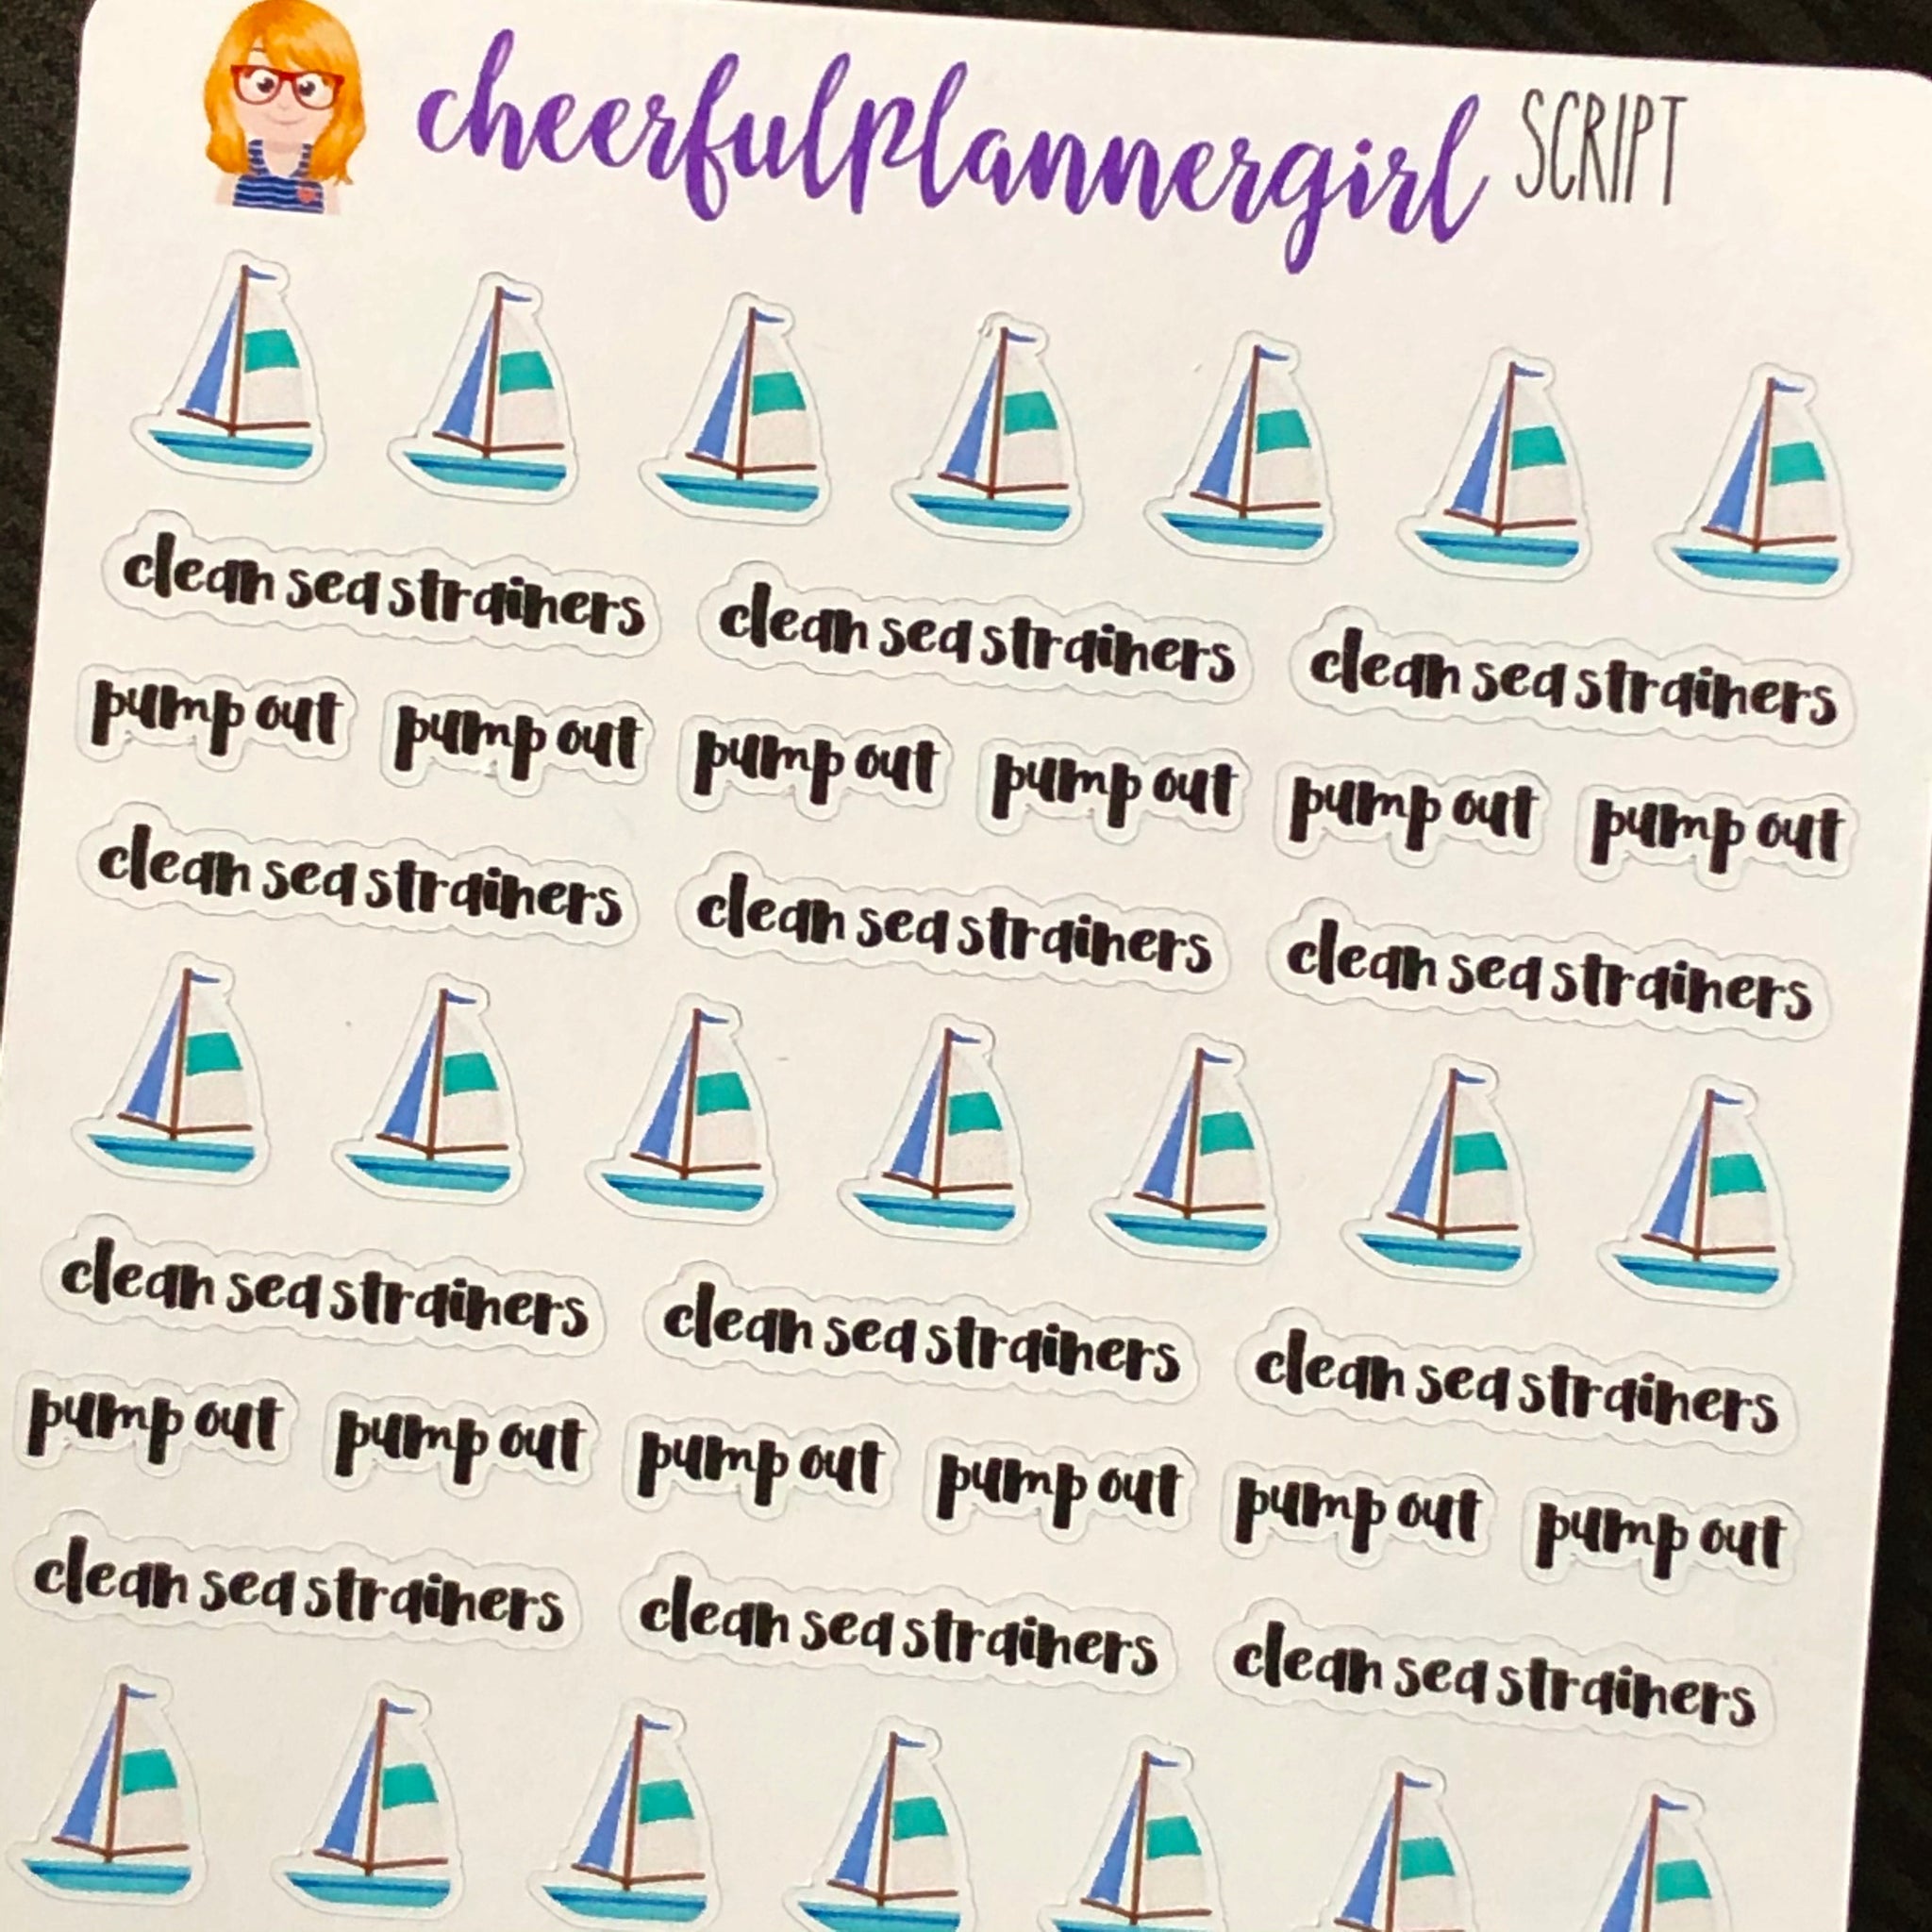 Clean Sea Stainers and Pump Out Script with Icon Planner Stickers